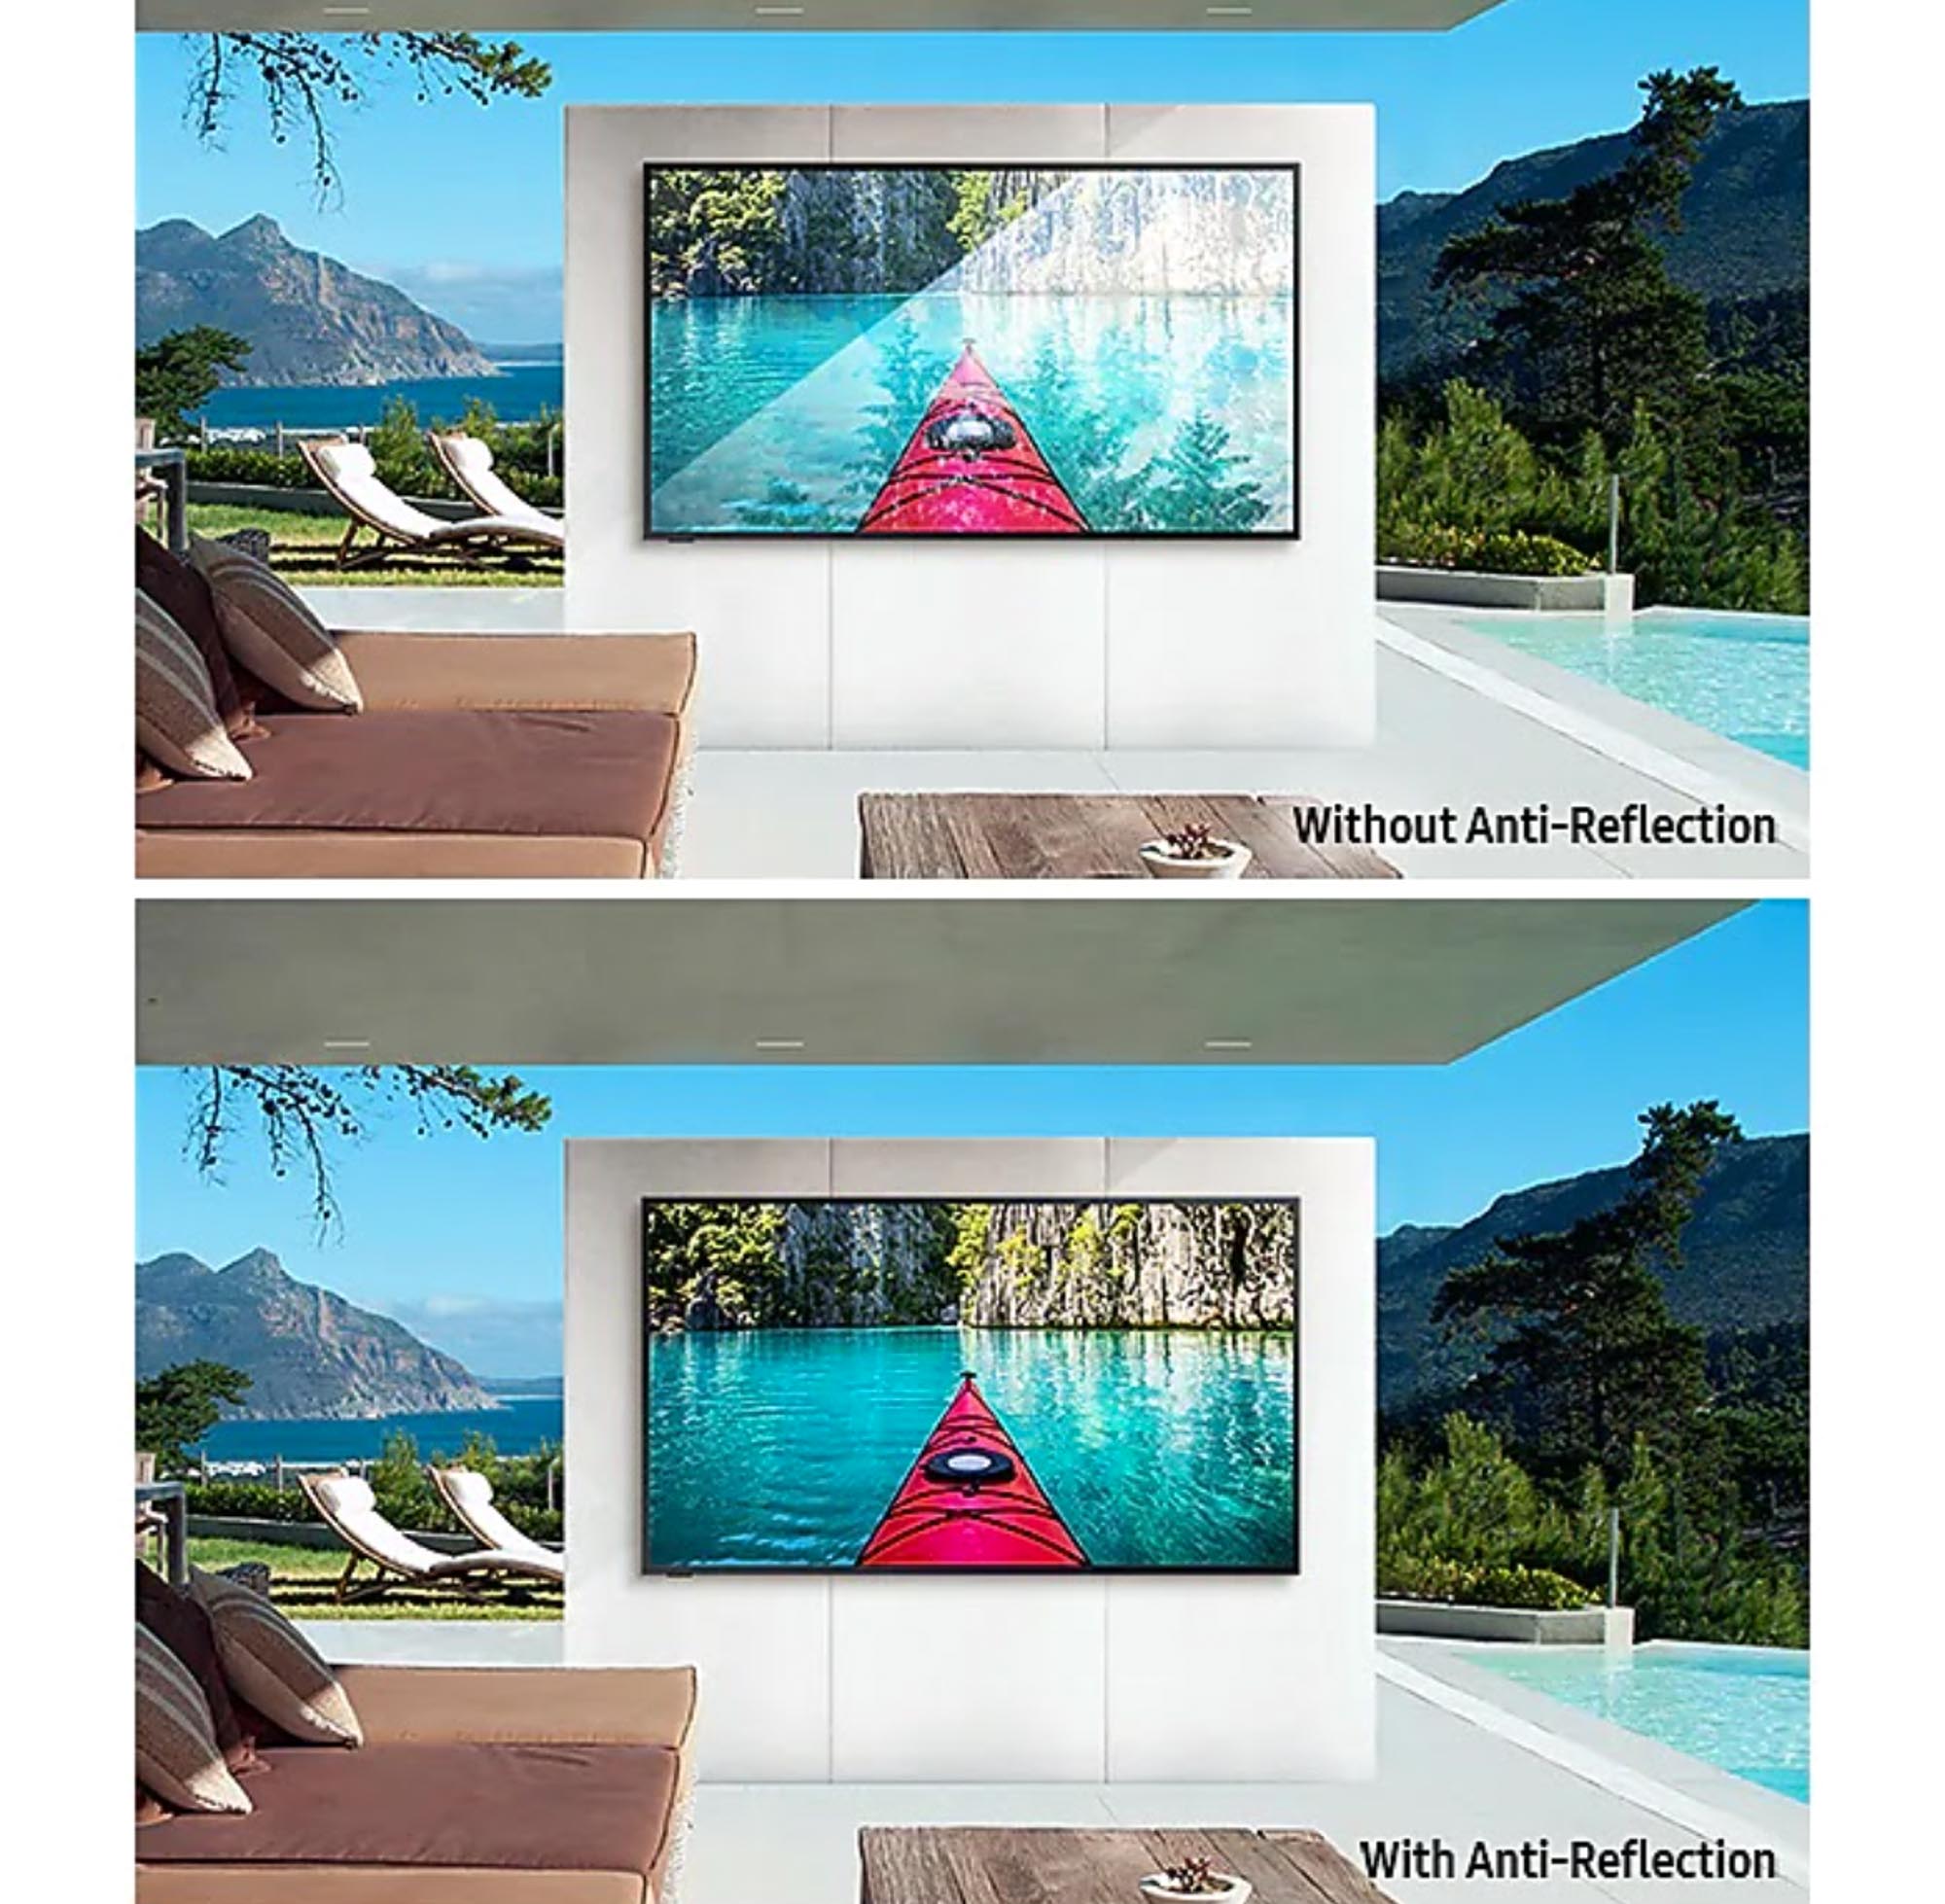 How to buy the best outdoor TV | Tom's Guide